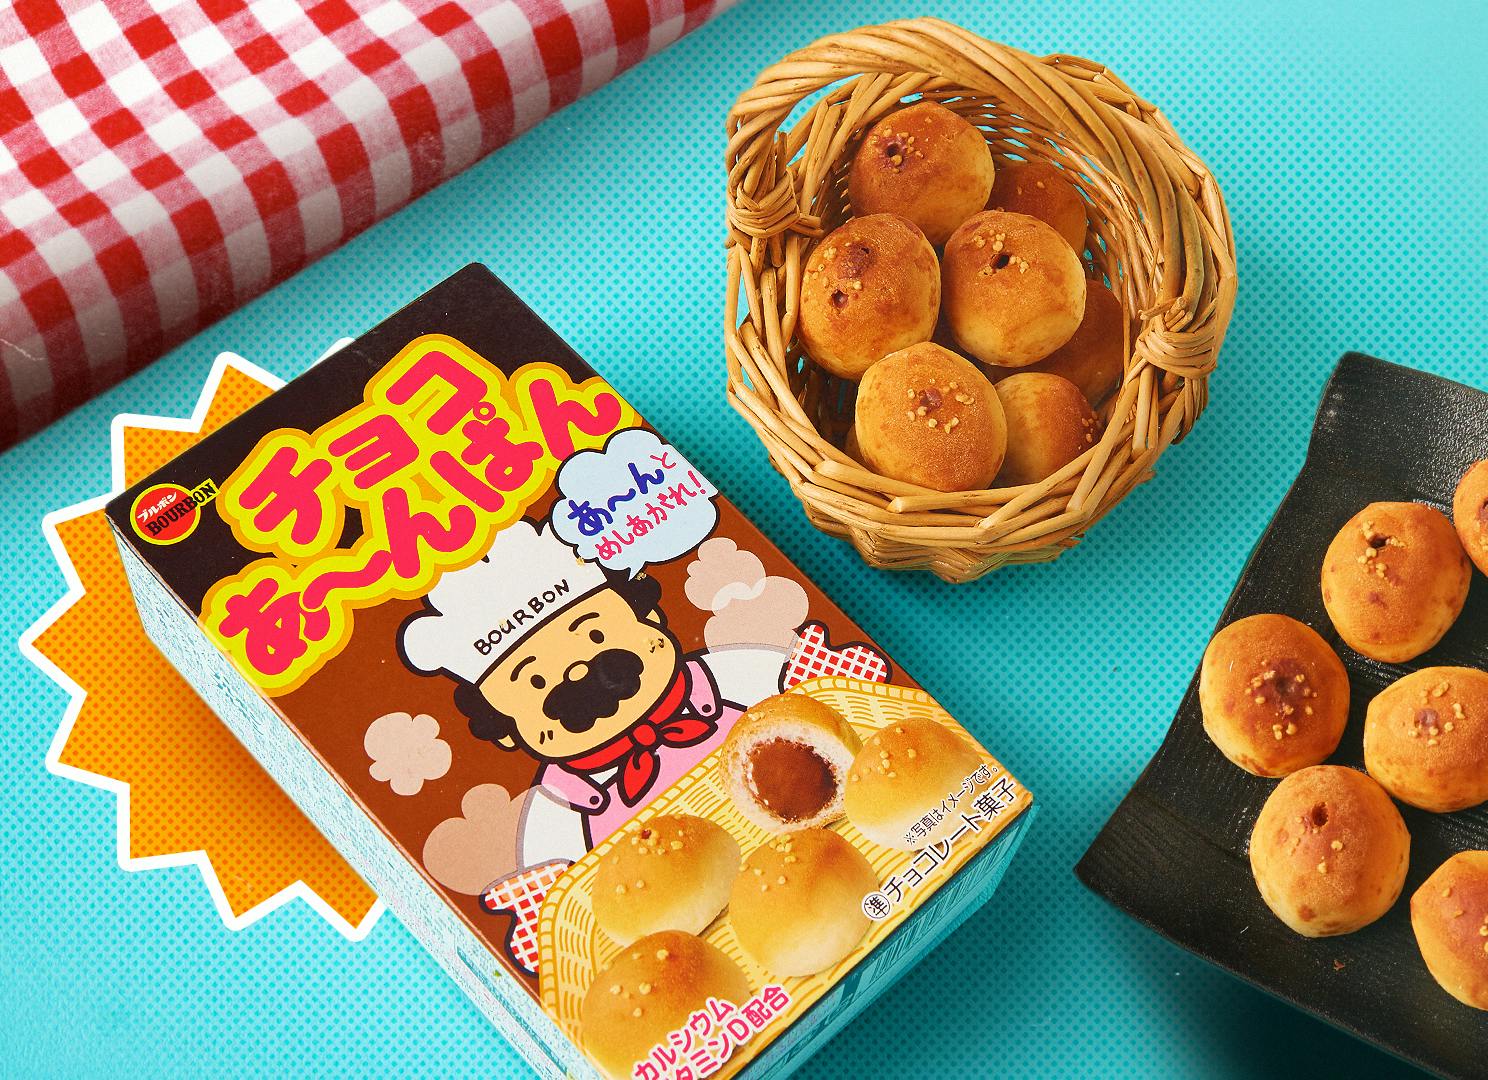 A package of chocolate bread bites features a cartoon chef